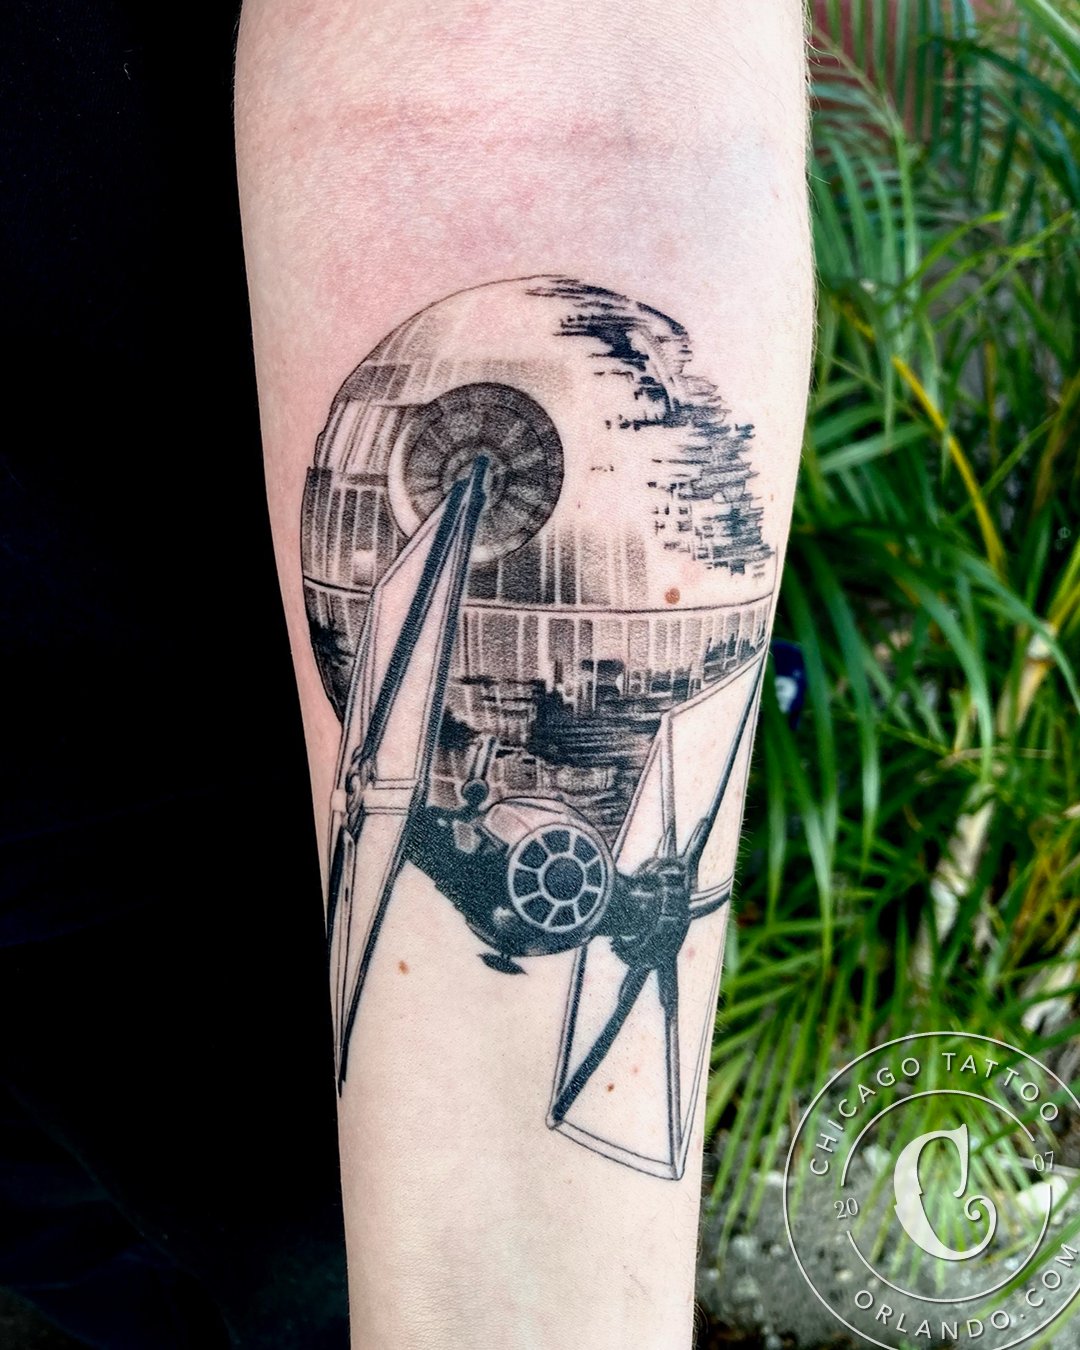 25 Of The Best Star Wars Tattoos In The Galaxy  The Funny Beaver